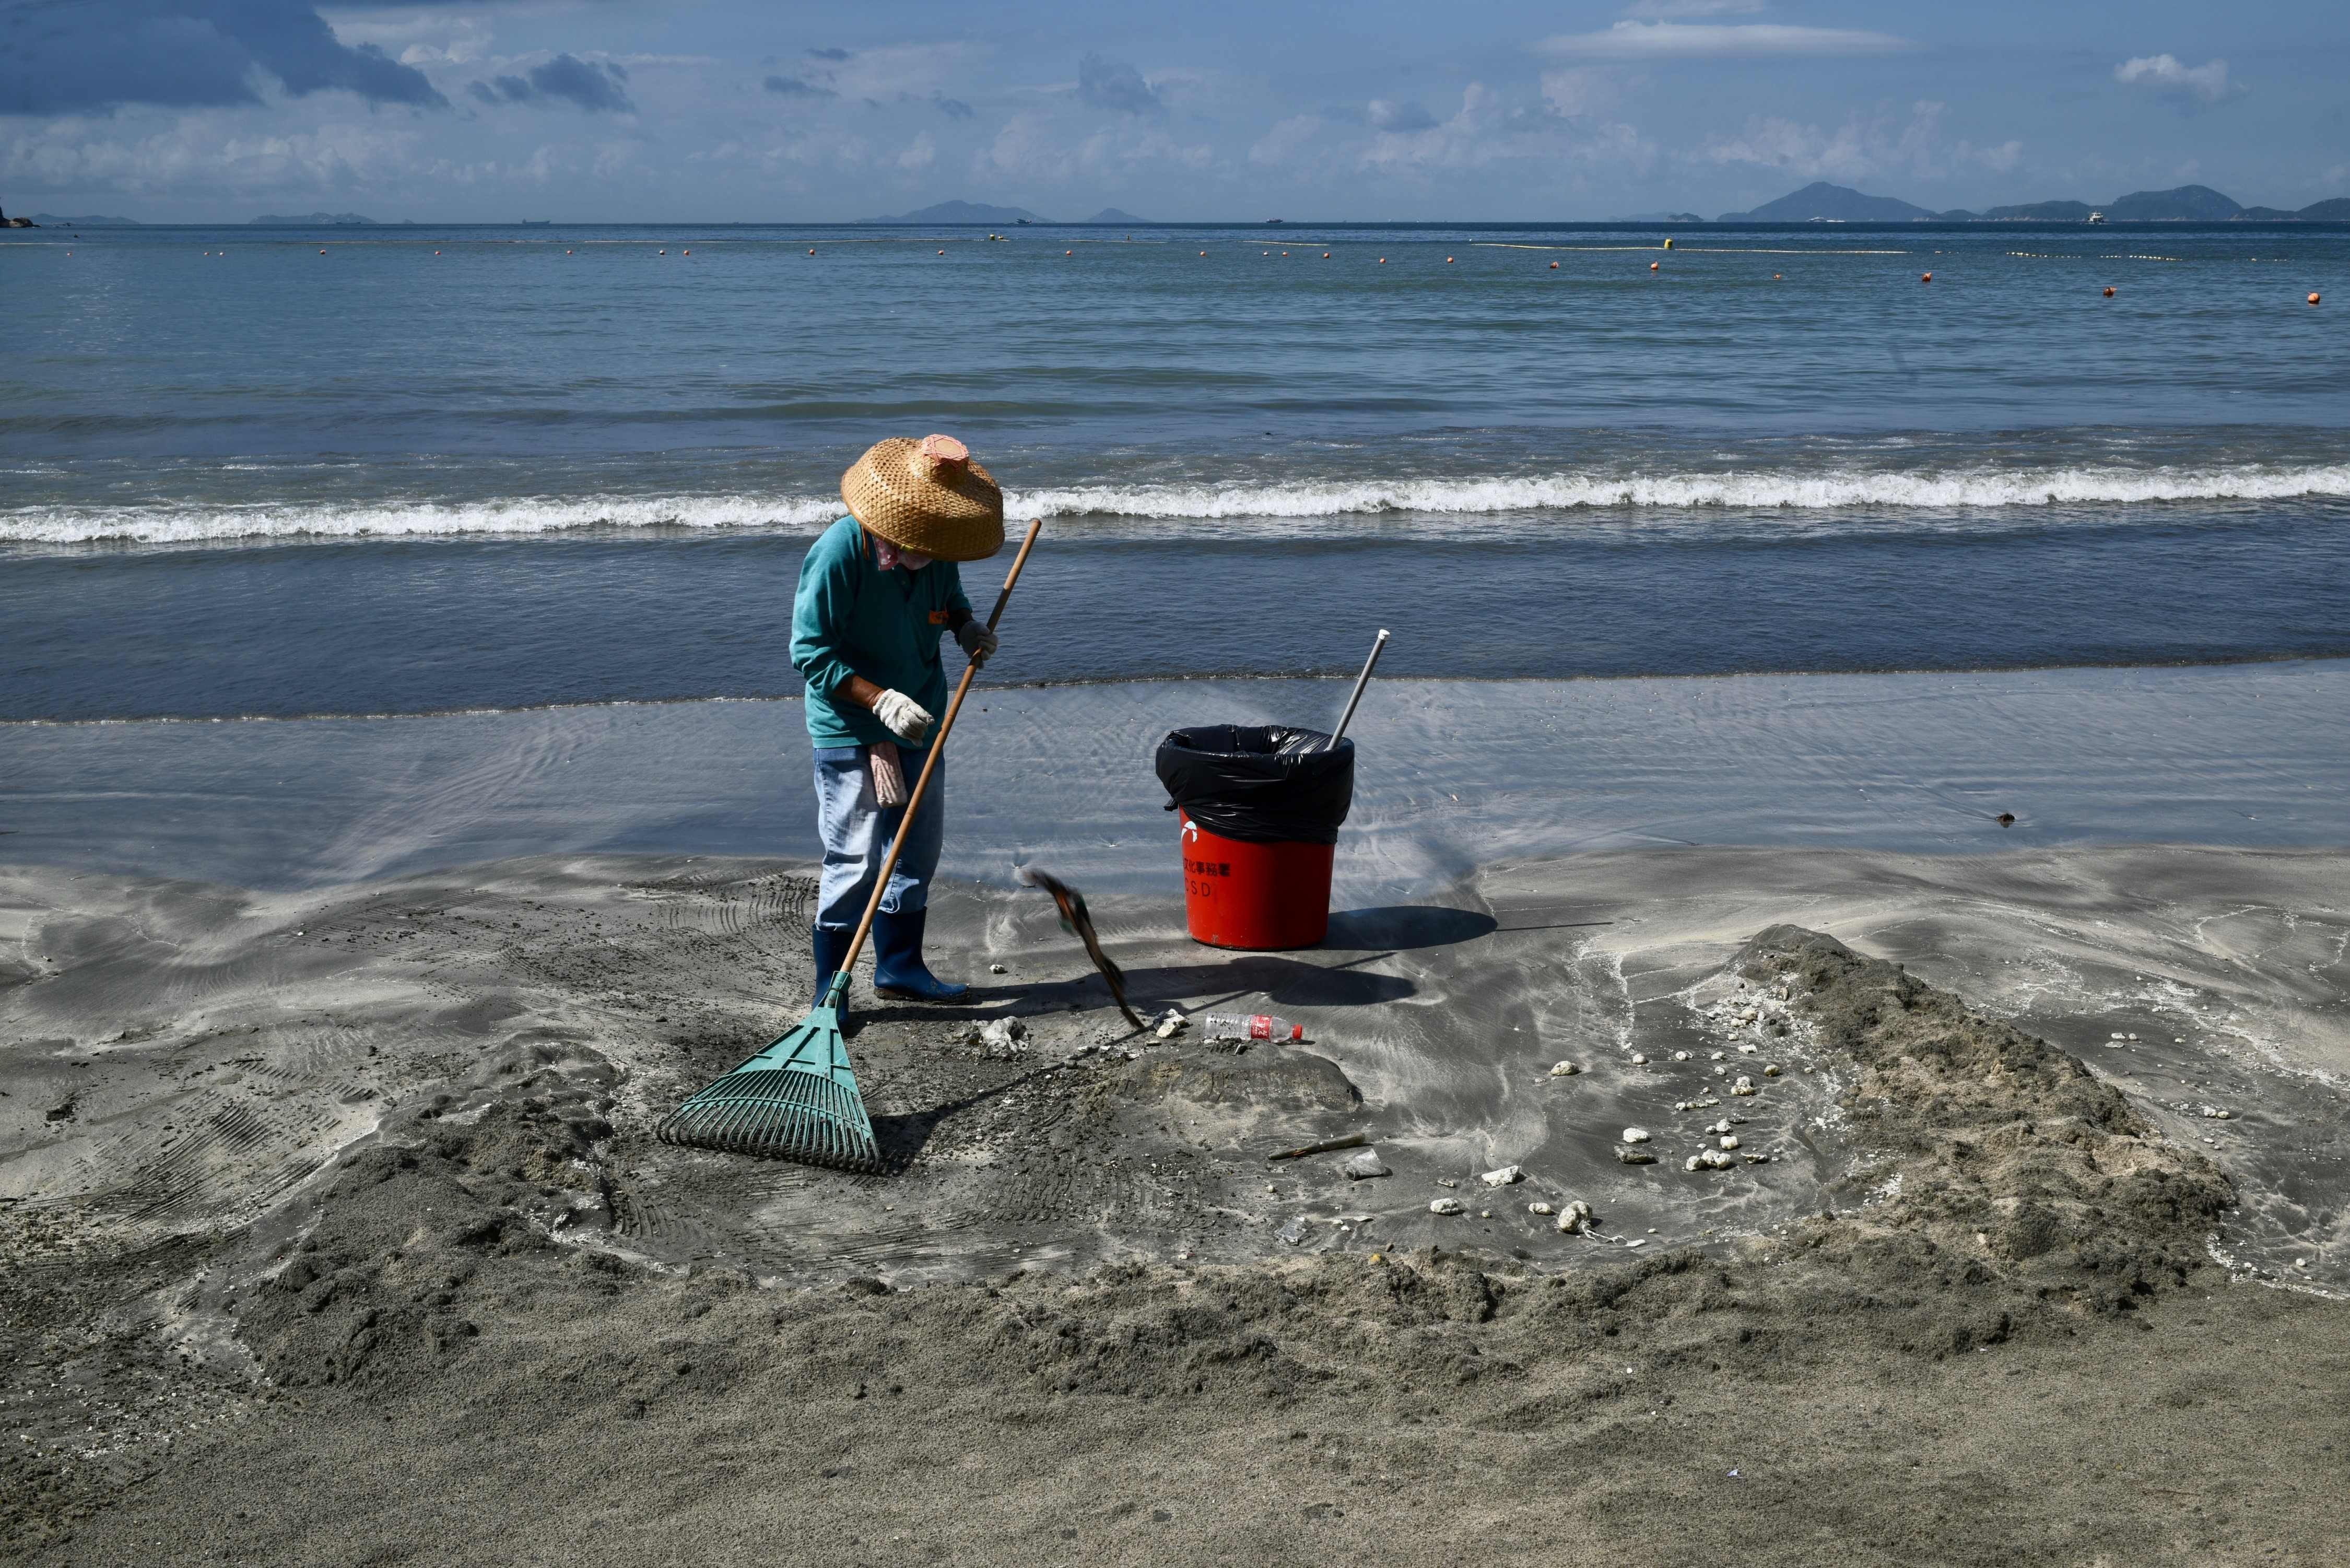 A cleaner at work on a Hong Kong beach. Under Hong Kong law, only employees engaged under a continuous contract are entitled to most benefits, including sick leave, annual leave, rest days, maternity and paternity leave and pay, end-of-year bonus, and the right to claim unreasonable dismissal. Photo: AFP